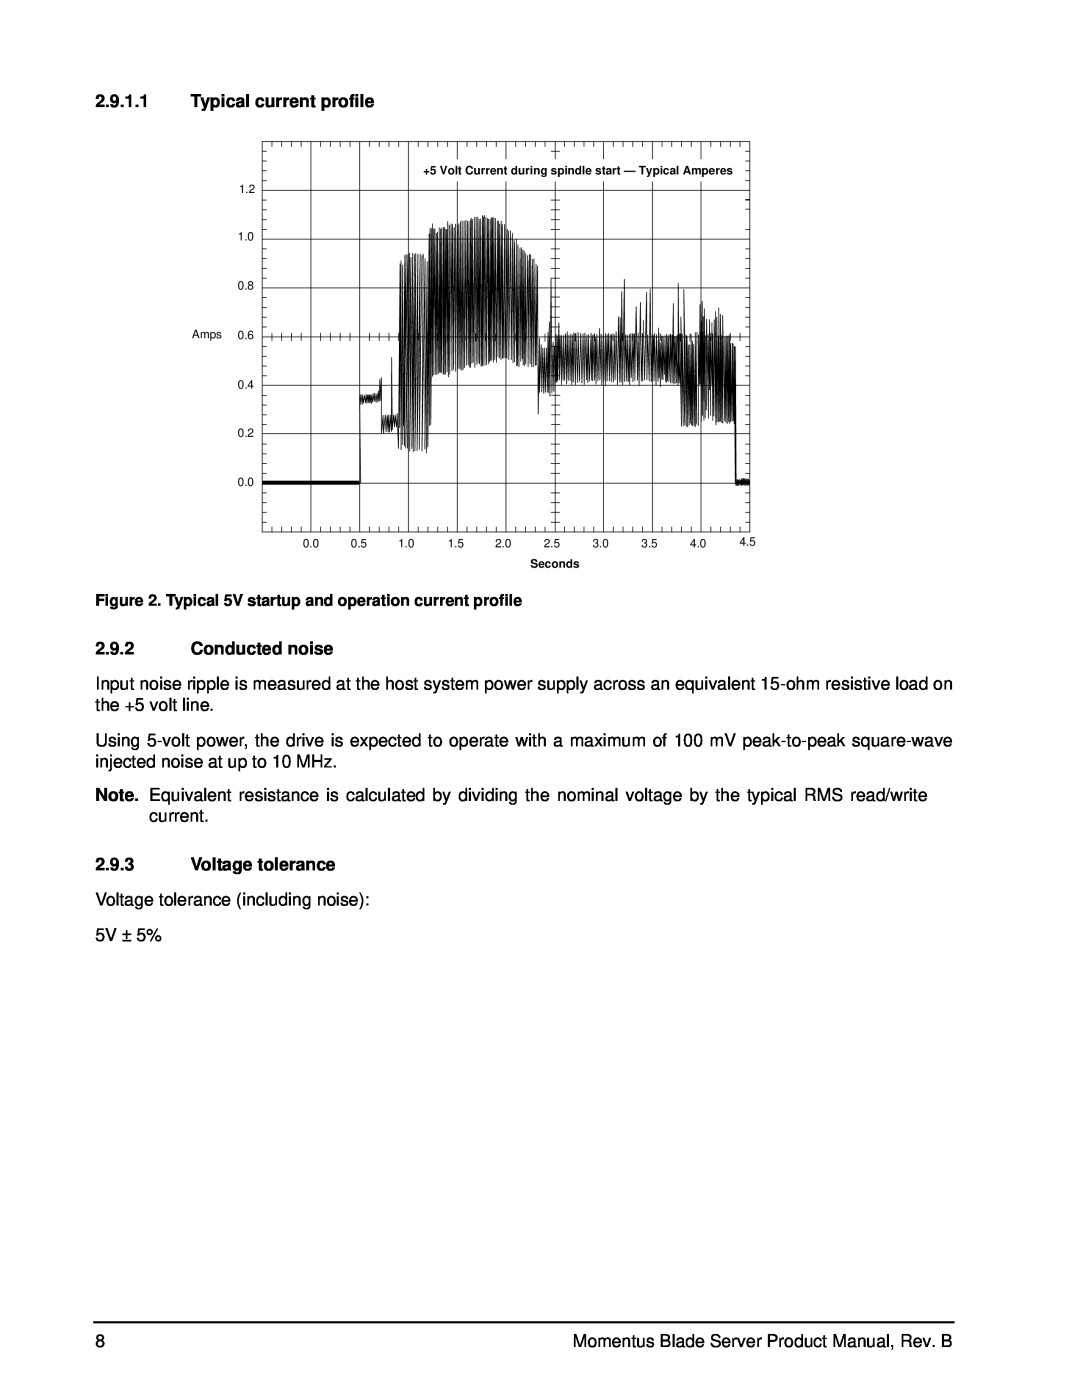 Seagate ST94811AB manual Typical current profile, Conducted noise, Voltage tolerance 